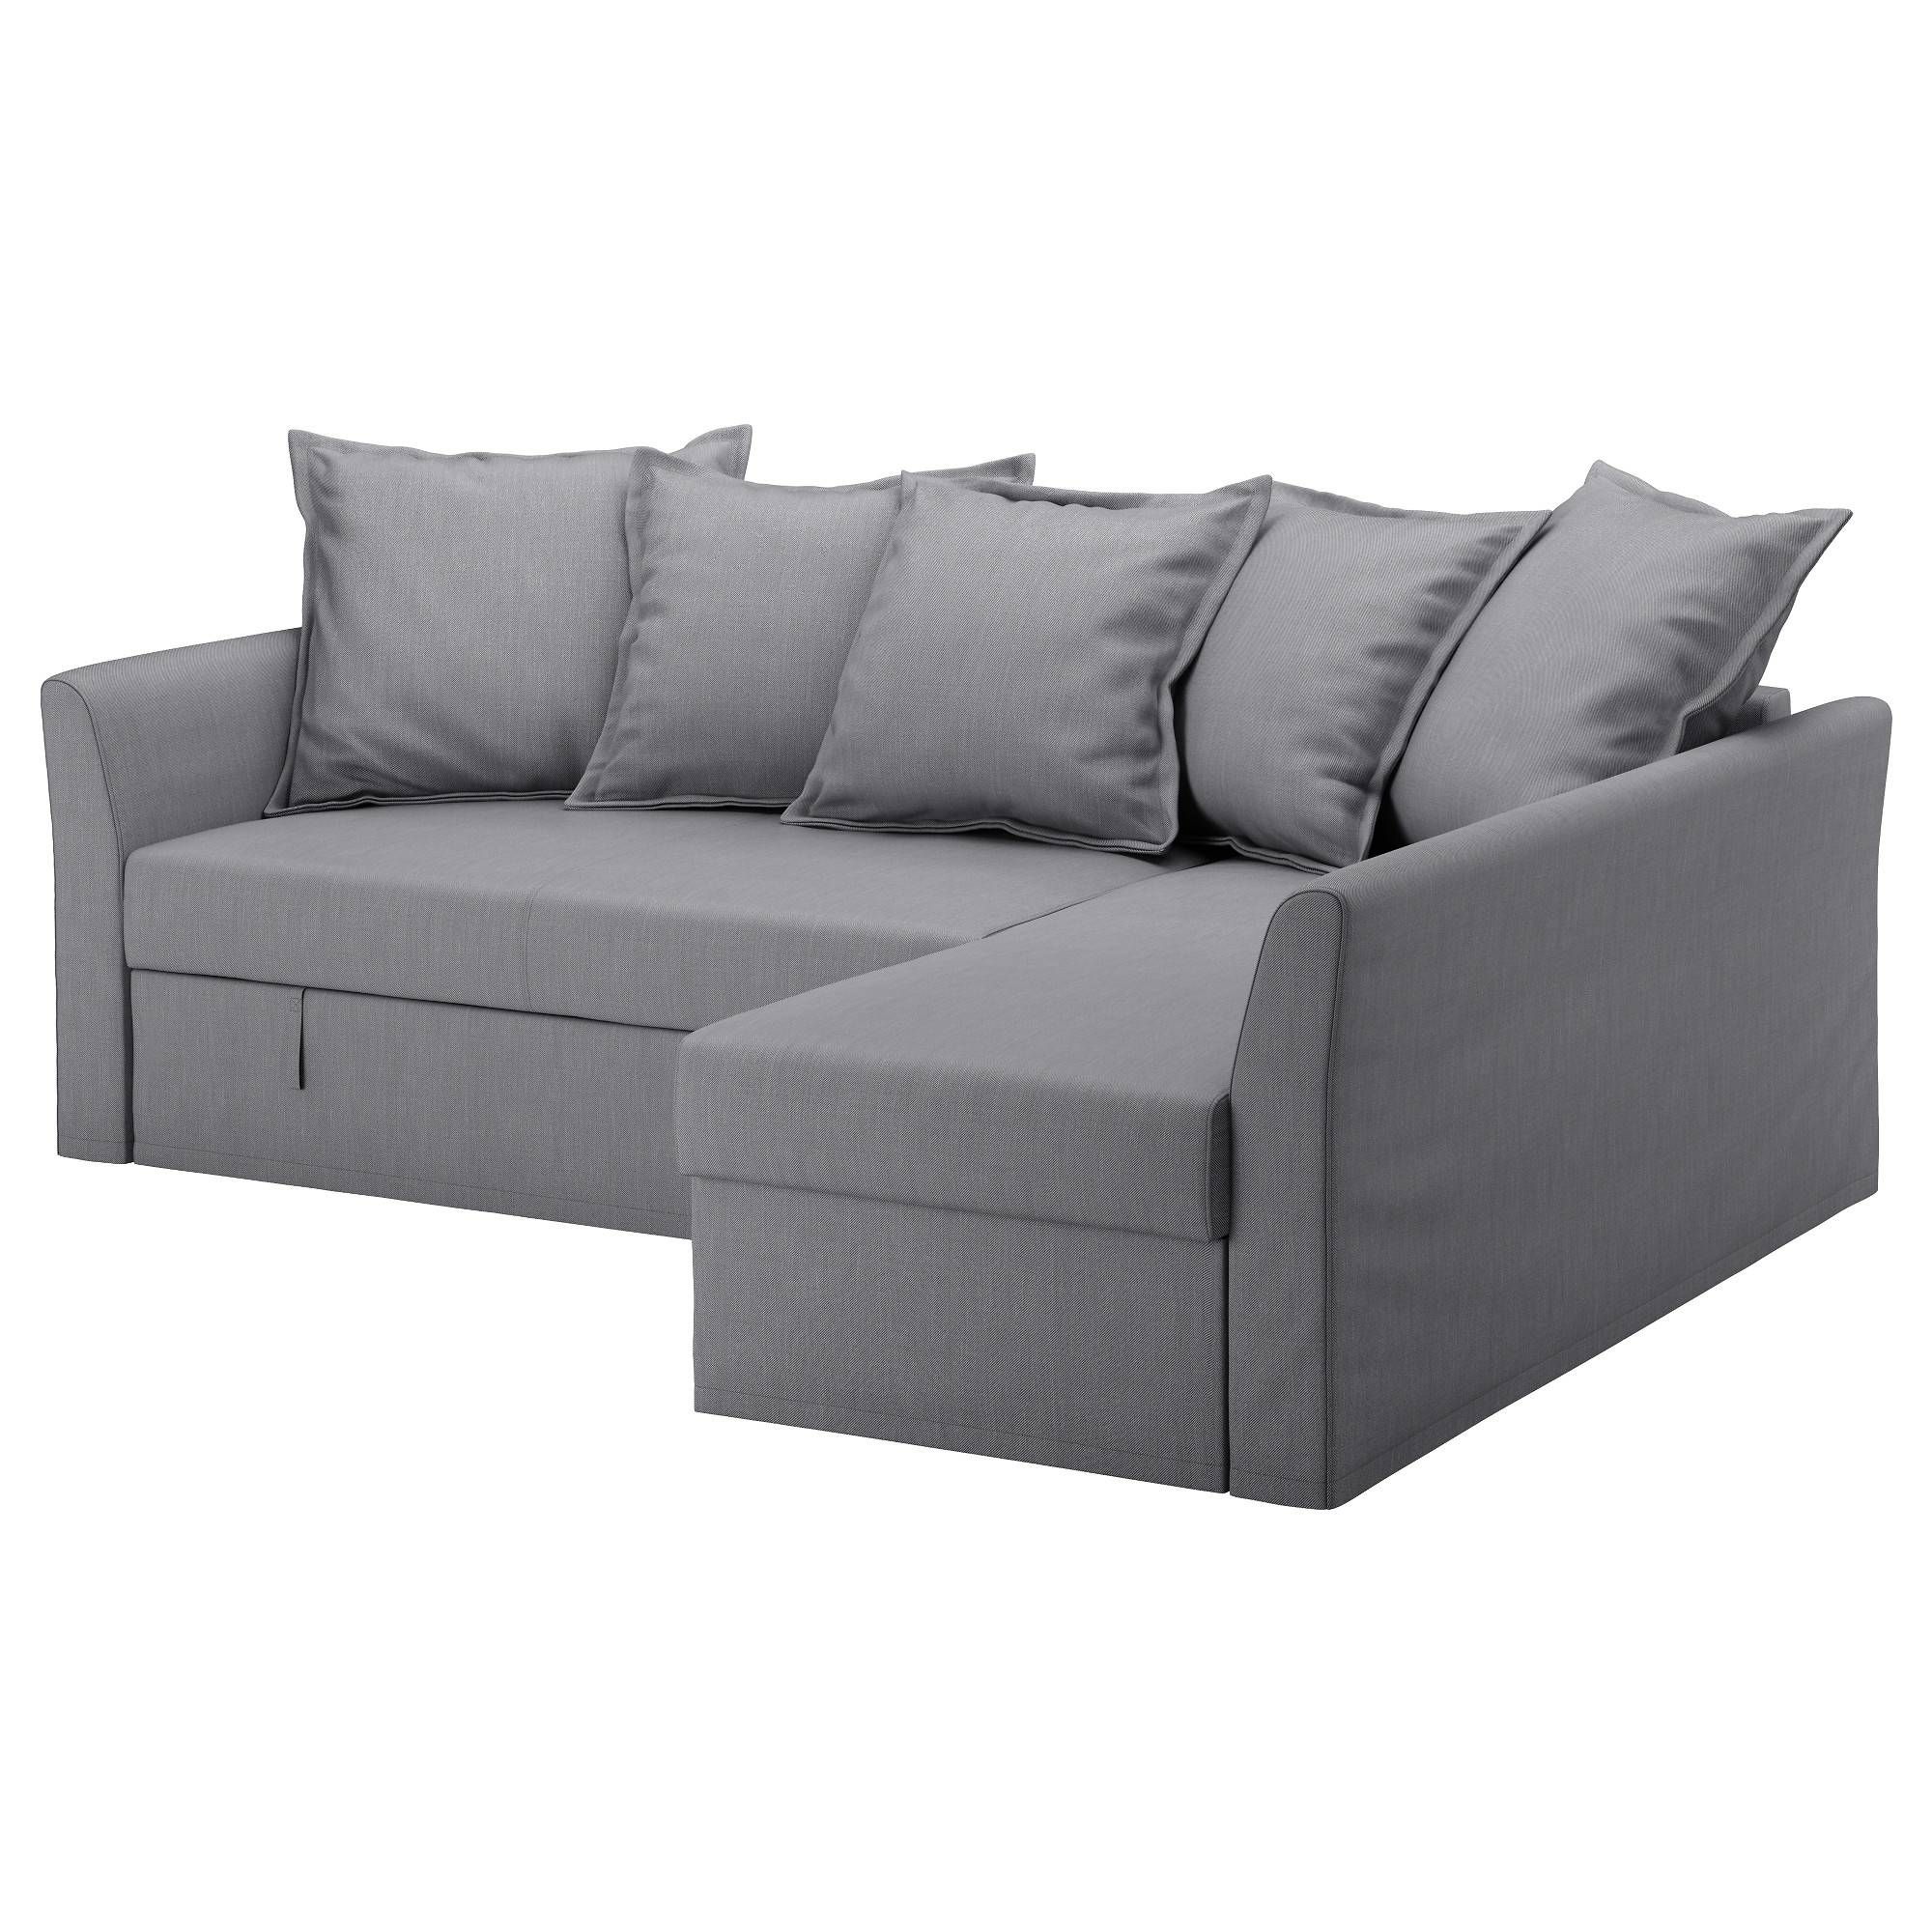 Holmsund Cover For Sleeper Sectional, 3 Seat – Nordvalla Medium Pertaining To Ikea Sectional Sleeper Sofa (View 3 of 25)